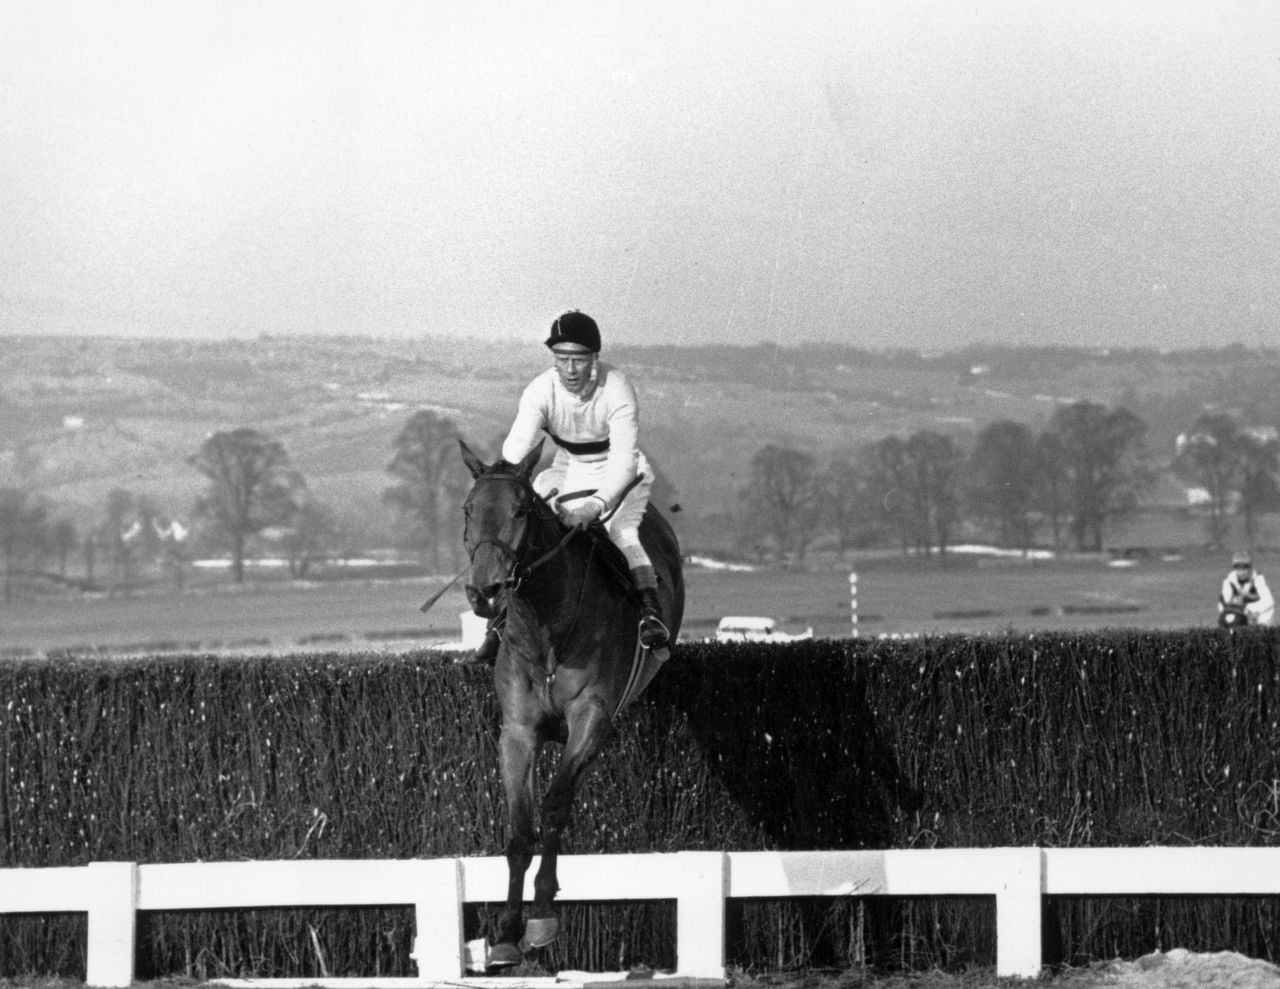 A legendary racehorse, Arkle has now been honored with his own beer. The three-time Cheltenham Gold Cup winner is the inspiration for "Arkle Ale," which is the product Arkell's Brewery. The beer will be on sales at Cheltenham racecourse, where Arkle won one of Britain's most famous races on three consecutive occasions between 1964 and 1966.